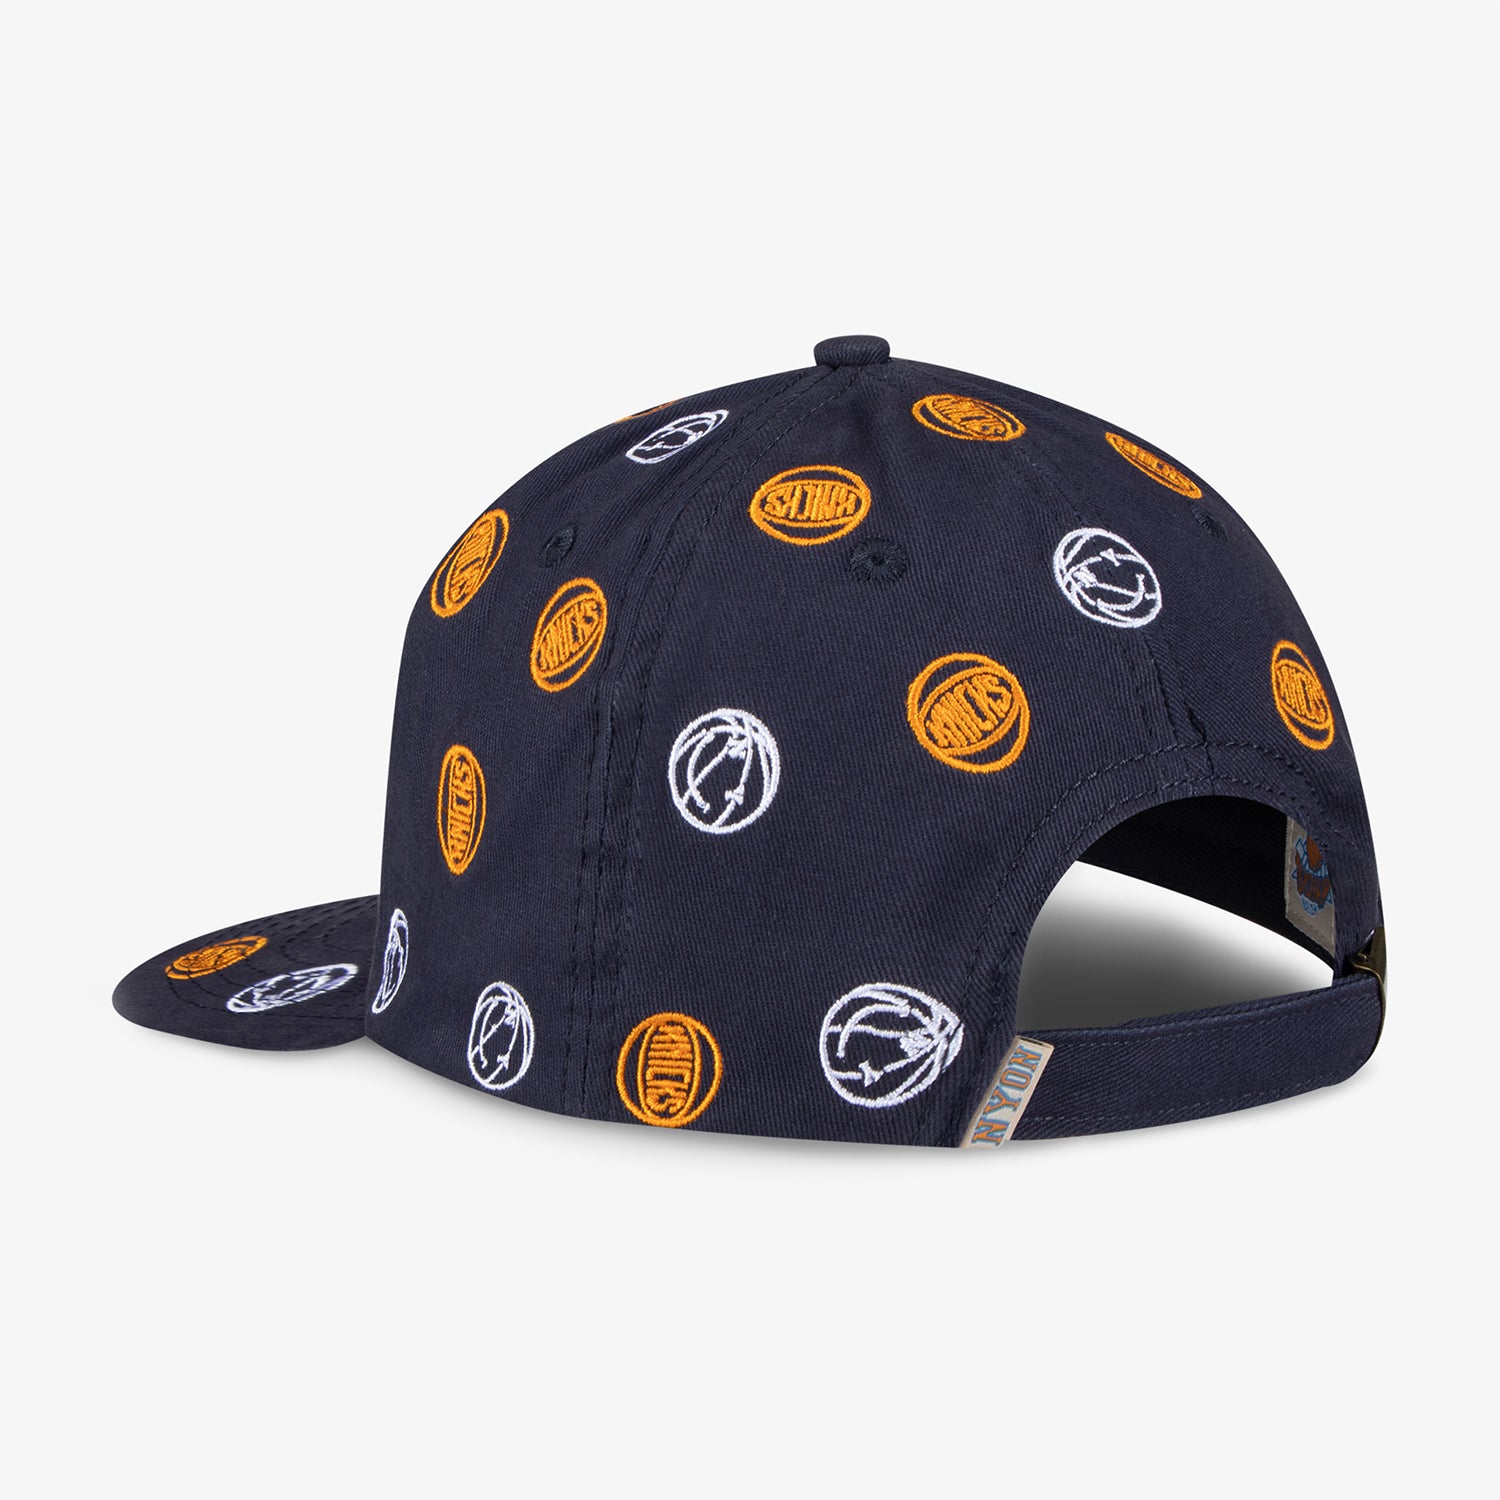 NYON X Knicks "Full Court" Dad Hat In Blue, Orange & White - Back Angled Left Side View